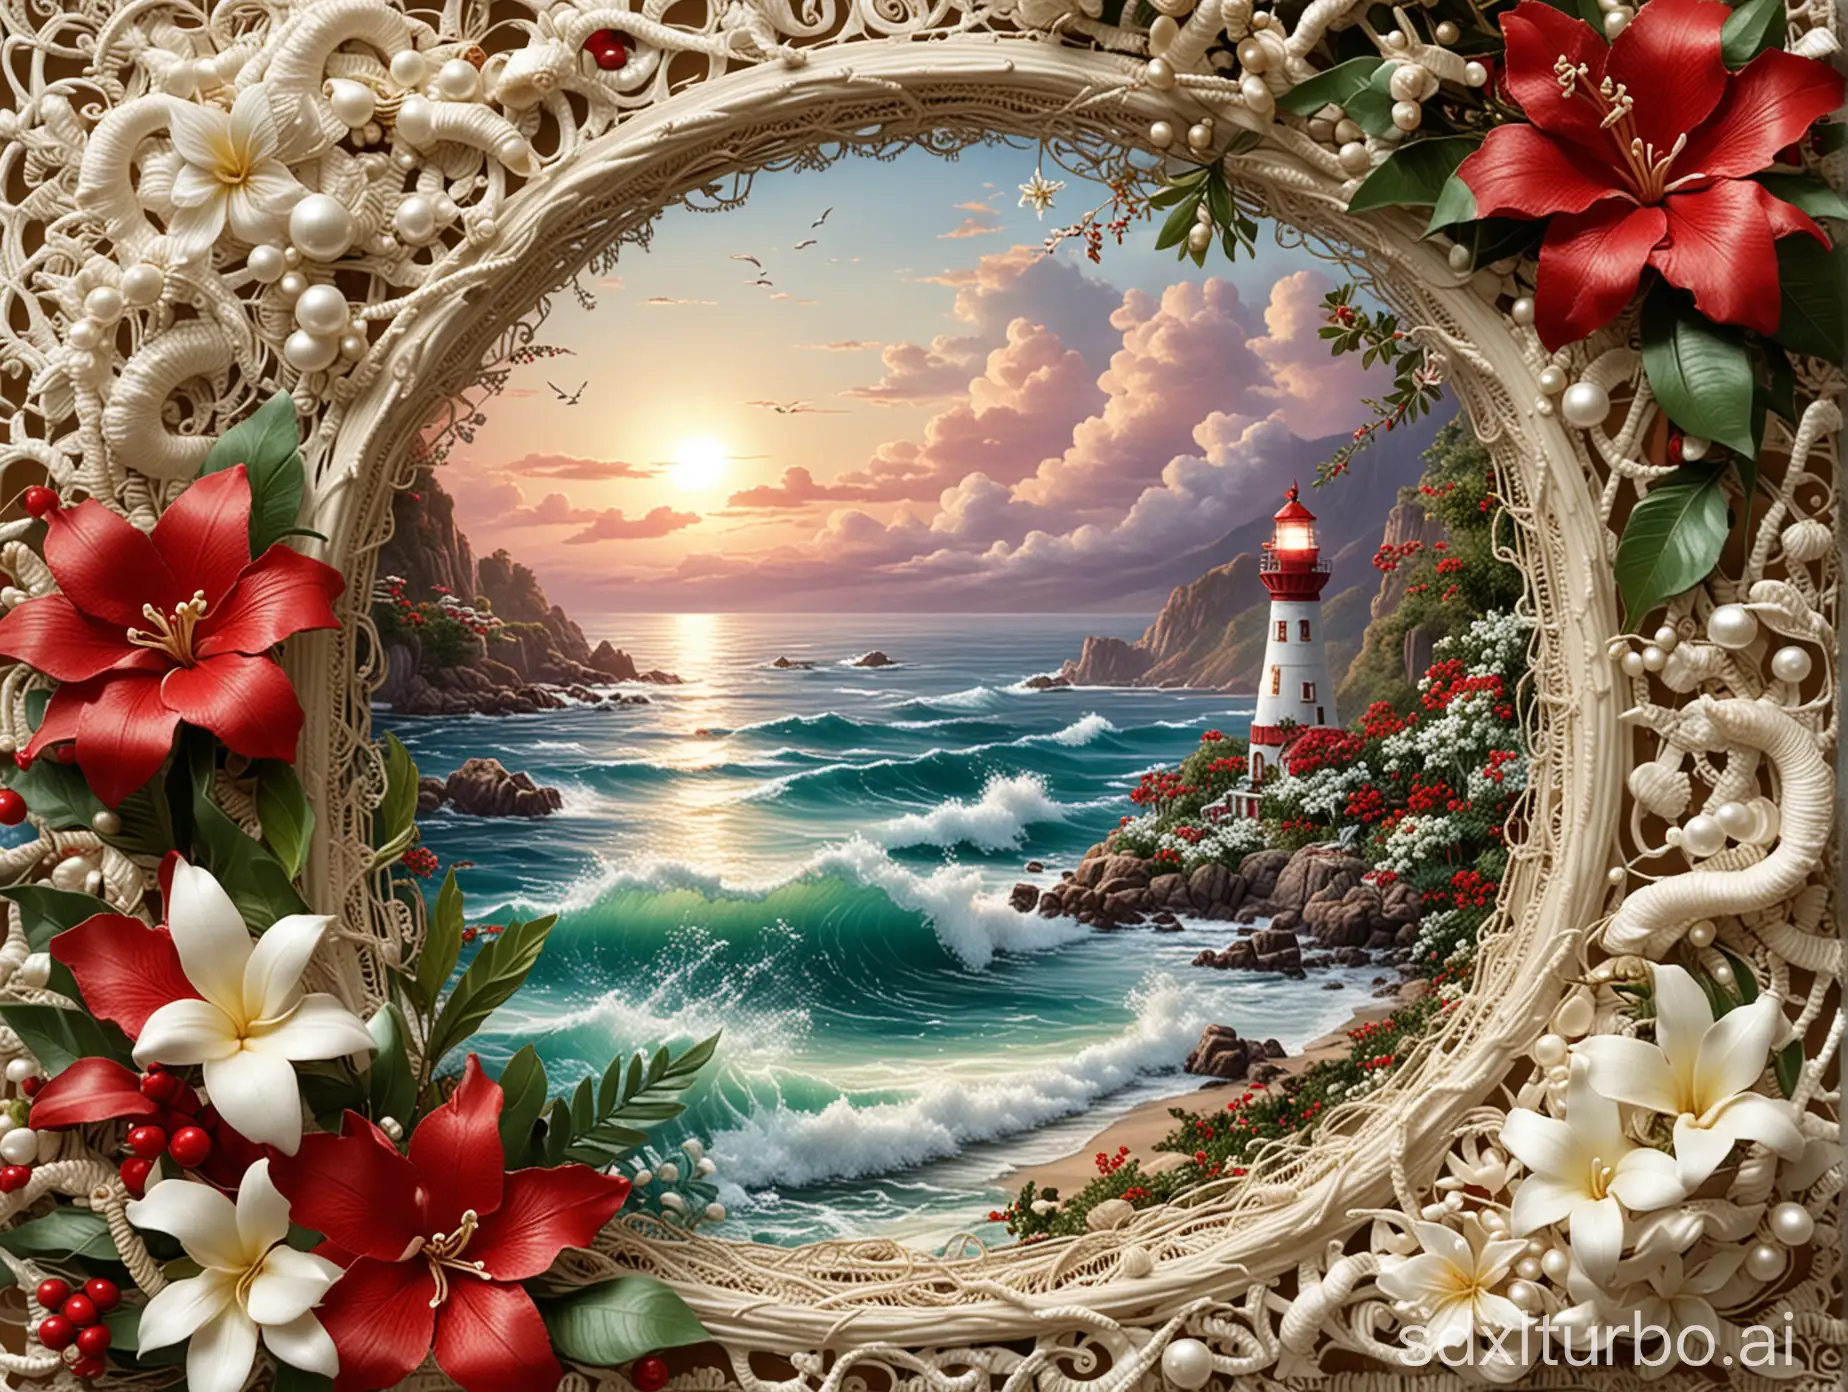 Enchanting-Spiral-Lighthouse-on-Lush-Island-with-Marine-Motifs-and-Floral-Accents